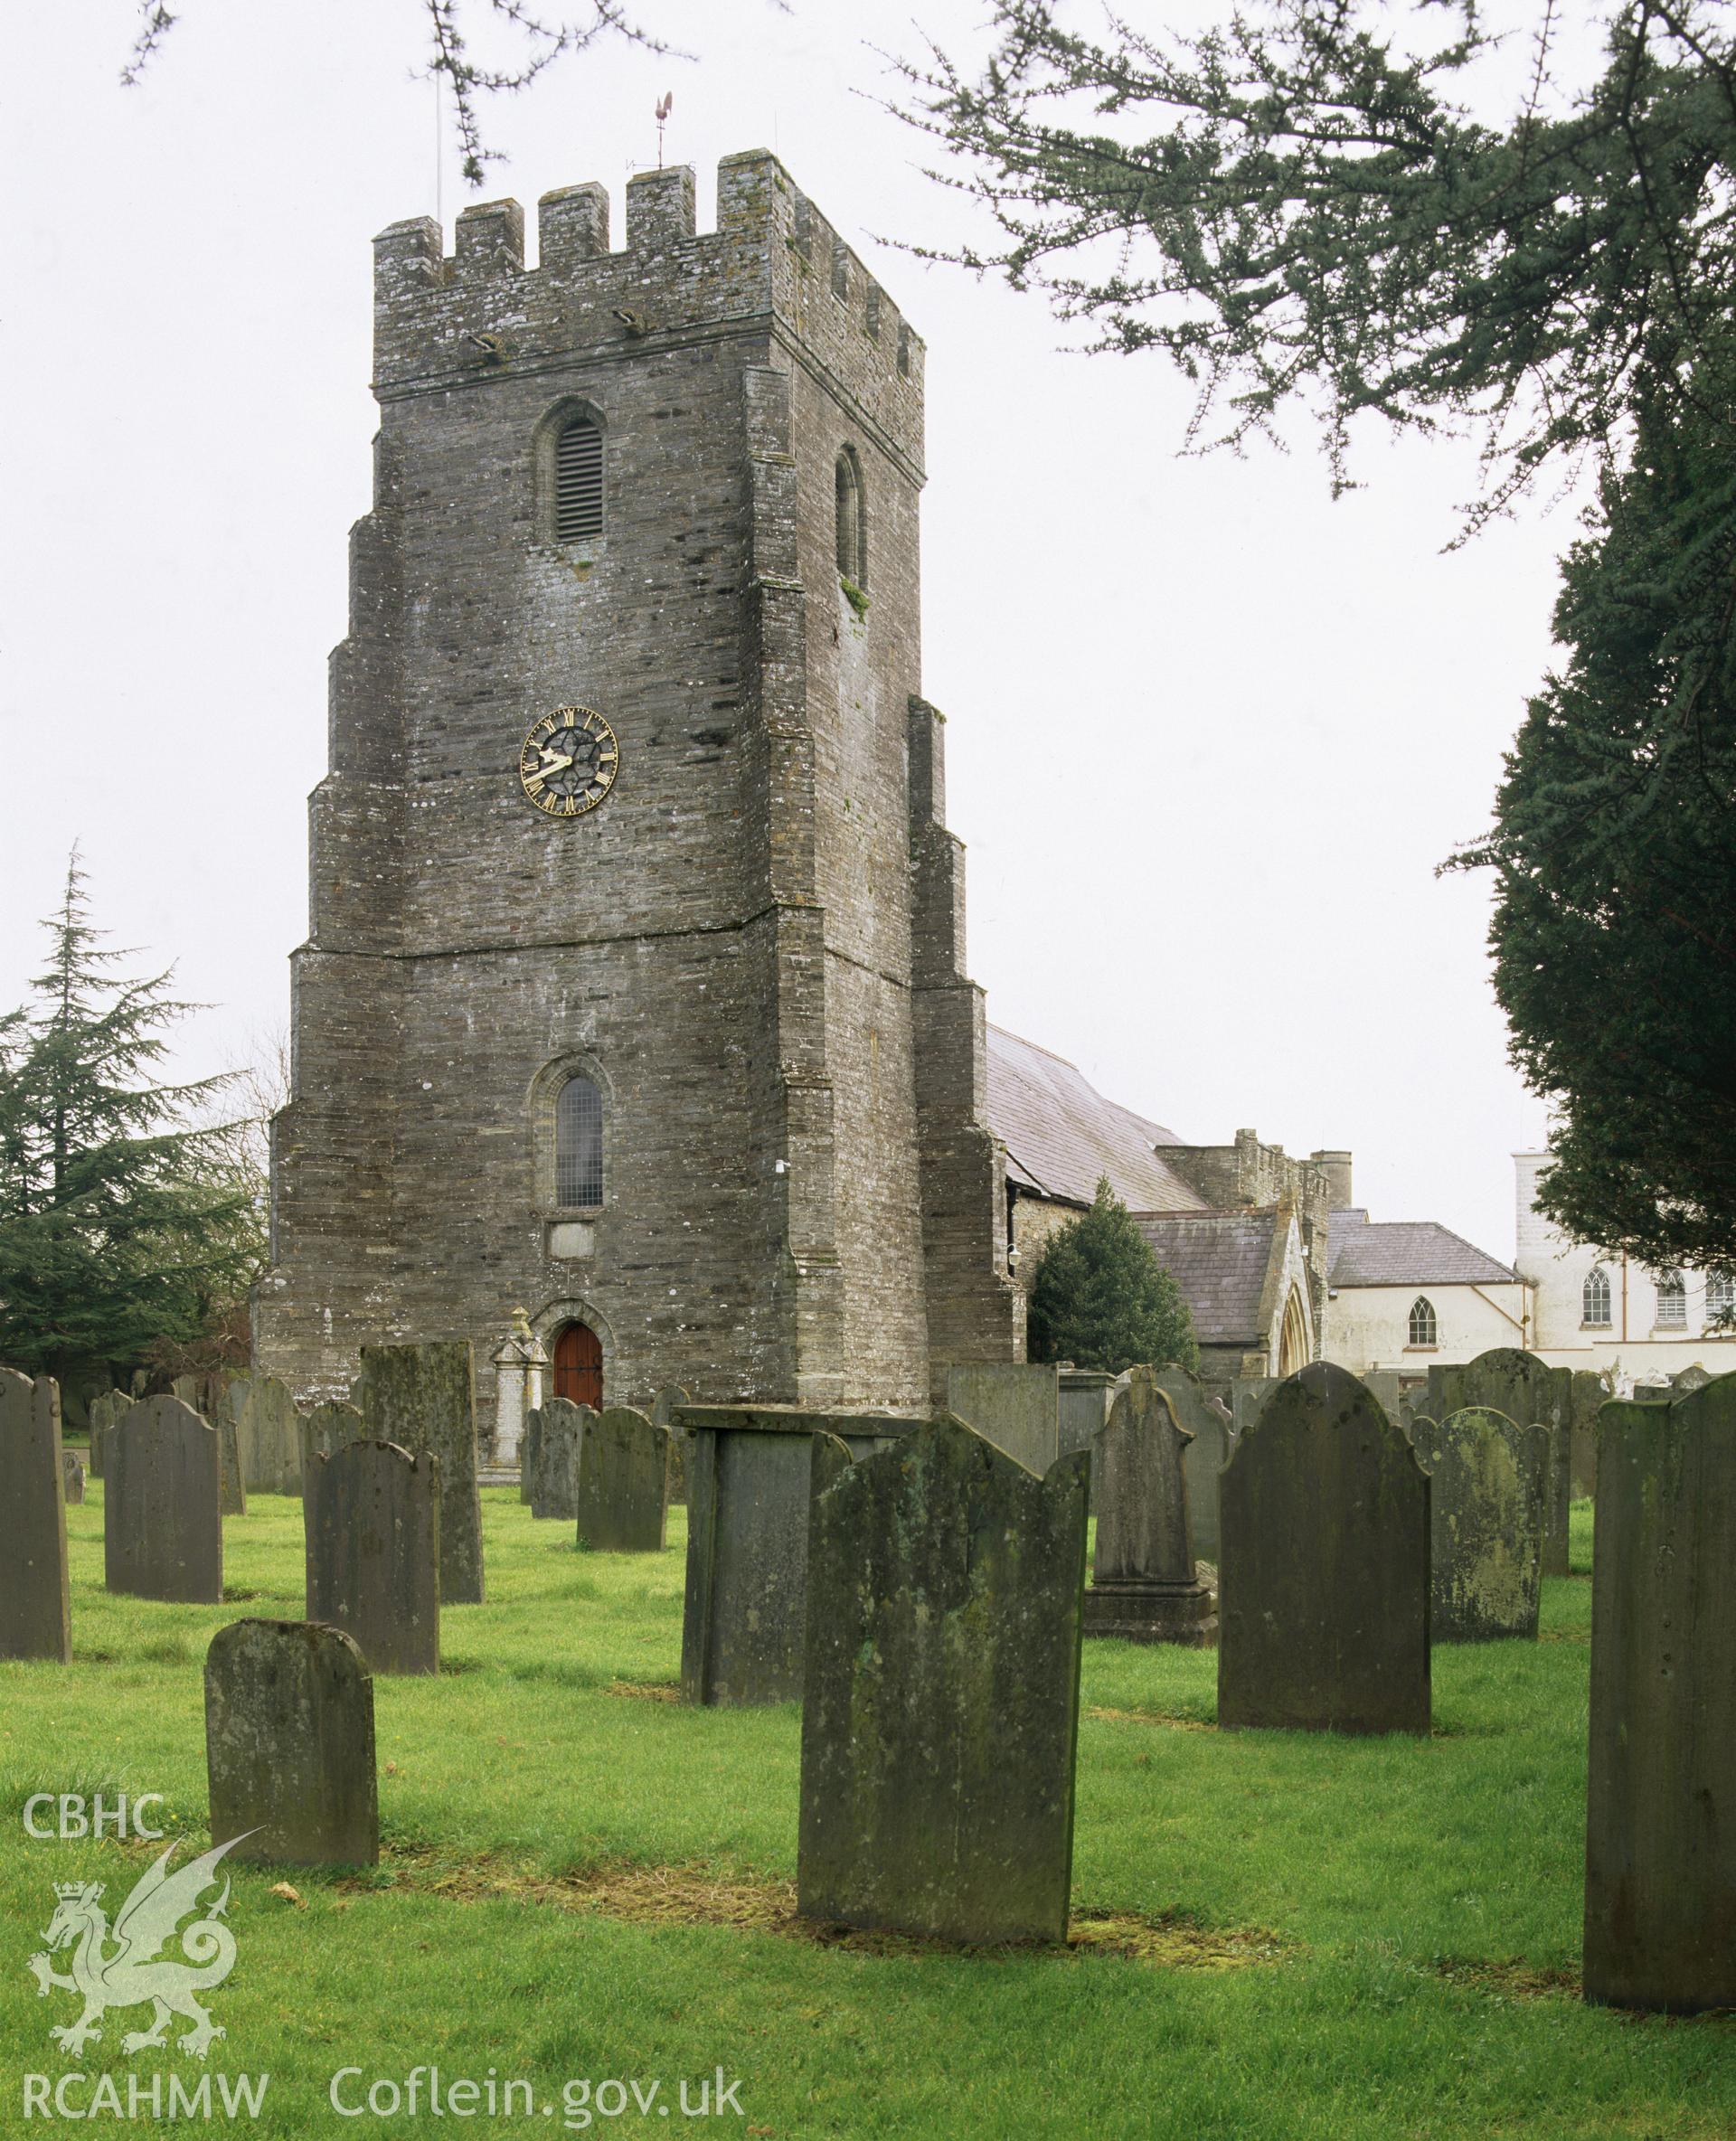 Colour transparency showing St Mary's Church, Cardigan, produced by Iain Wright, June 2004